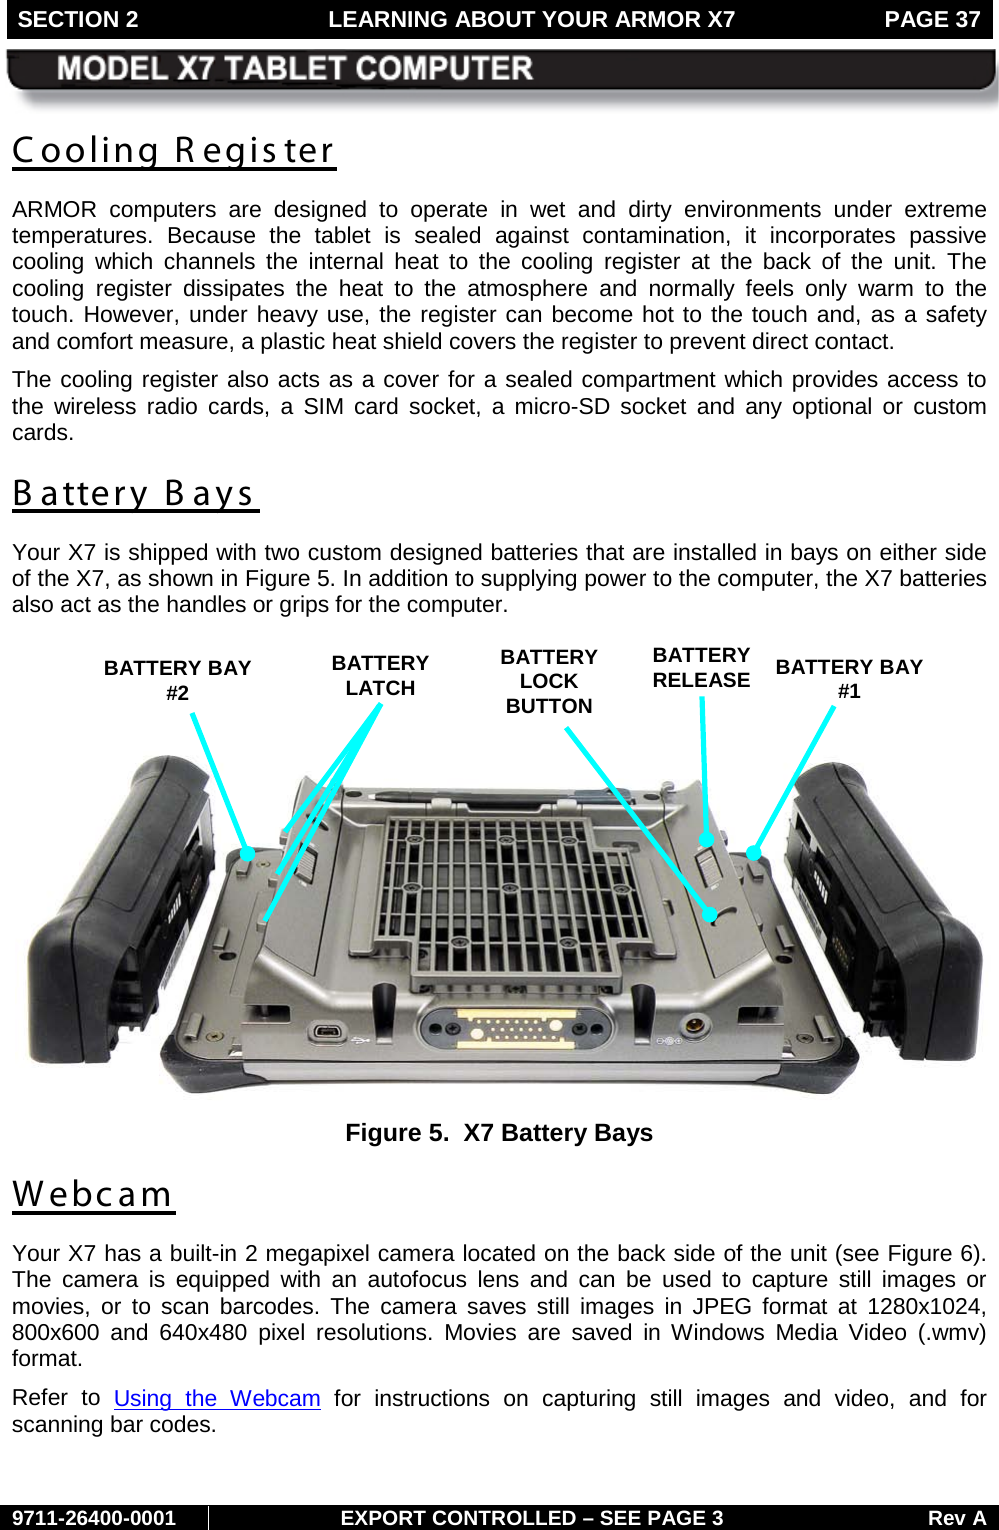 SECTION 2 LEARNING ABOUT YOUR ARMOR X7  PAGE 37        9711-26400-0001 EXPORT CONTROLLED – SEE PAGE 3 Rev A Cooling R egister ARMOR computers are designed to operate in wet and dirty environments under extreme temperatures.  Because the tablet is sealed against contamination, it incorporates passive cooling which channels the internal heat to the cooling register at the back of the unit. The cooling  register dissipates the heat to the atmosphere and  normally  feels  only warm to the touch. However, under heavy use, the register can become hot to the touch and, as a safety and comfort measure, a plastic heat shield covers the register to prevent direct contact. The cooling register also acts as a cover for a sealed compartment which provides access to the wireless radio cards,  a  SIM card socket, a micro-SD socket and any optional or custom cards. B attery Bays Your X7 is shipped with two custom designed batteries that are installed in bays on either side of the X7, as shown in Figure 5. In addition to supplying power to the computer, the X7 batteries also act as the handles or grips for the computer.      Figure 5.  X7 Battery Bays Webcam Your X7 has a built-in 2 megapixel camera located on the back side of the unit (see Figure 6). The camera is equipped with an autofocus lens and can be used to capture still images or movies, or to scan barcodes. The camera saves still images in JPEG format at 1280x1024, 800x600 and 640x480 pixel resolutions. Movies are saved in Windows Media Video (.wmv) format.  Refer to Using the Webcam for instructions on capturing still images and video,  and  for scanning bar codes. BATTERY BAY #2  BATTERY BAY #1  BATTERY LATCH BATTERY  LOCK  BUTTON BATTERY RELEASE 